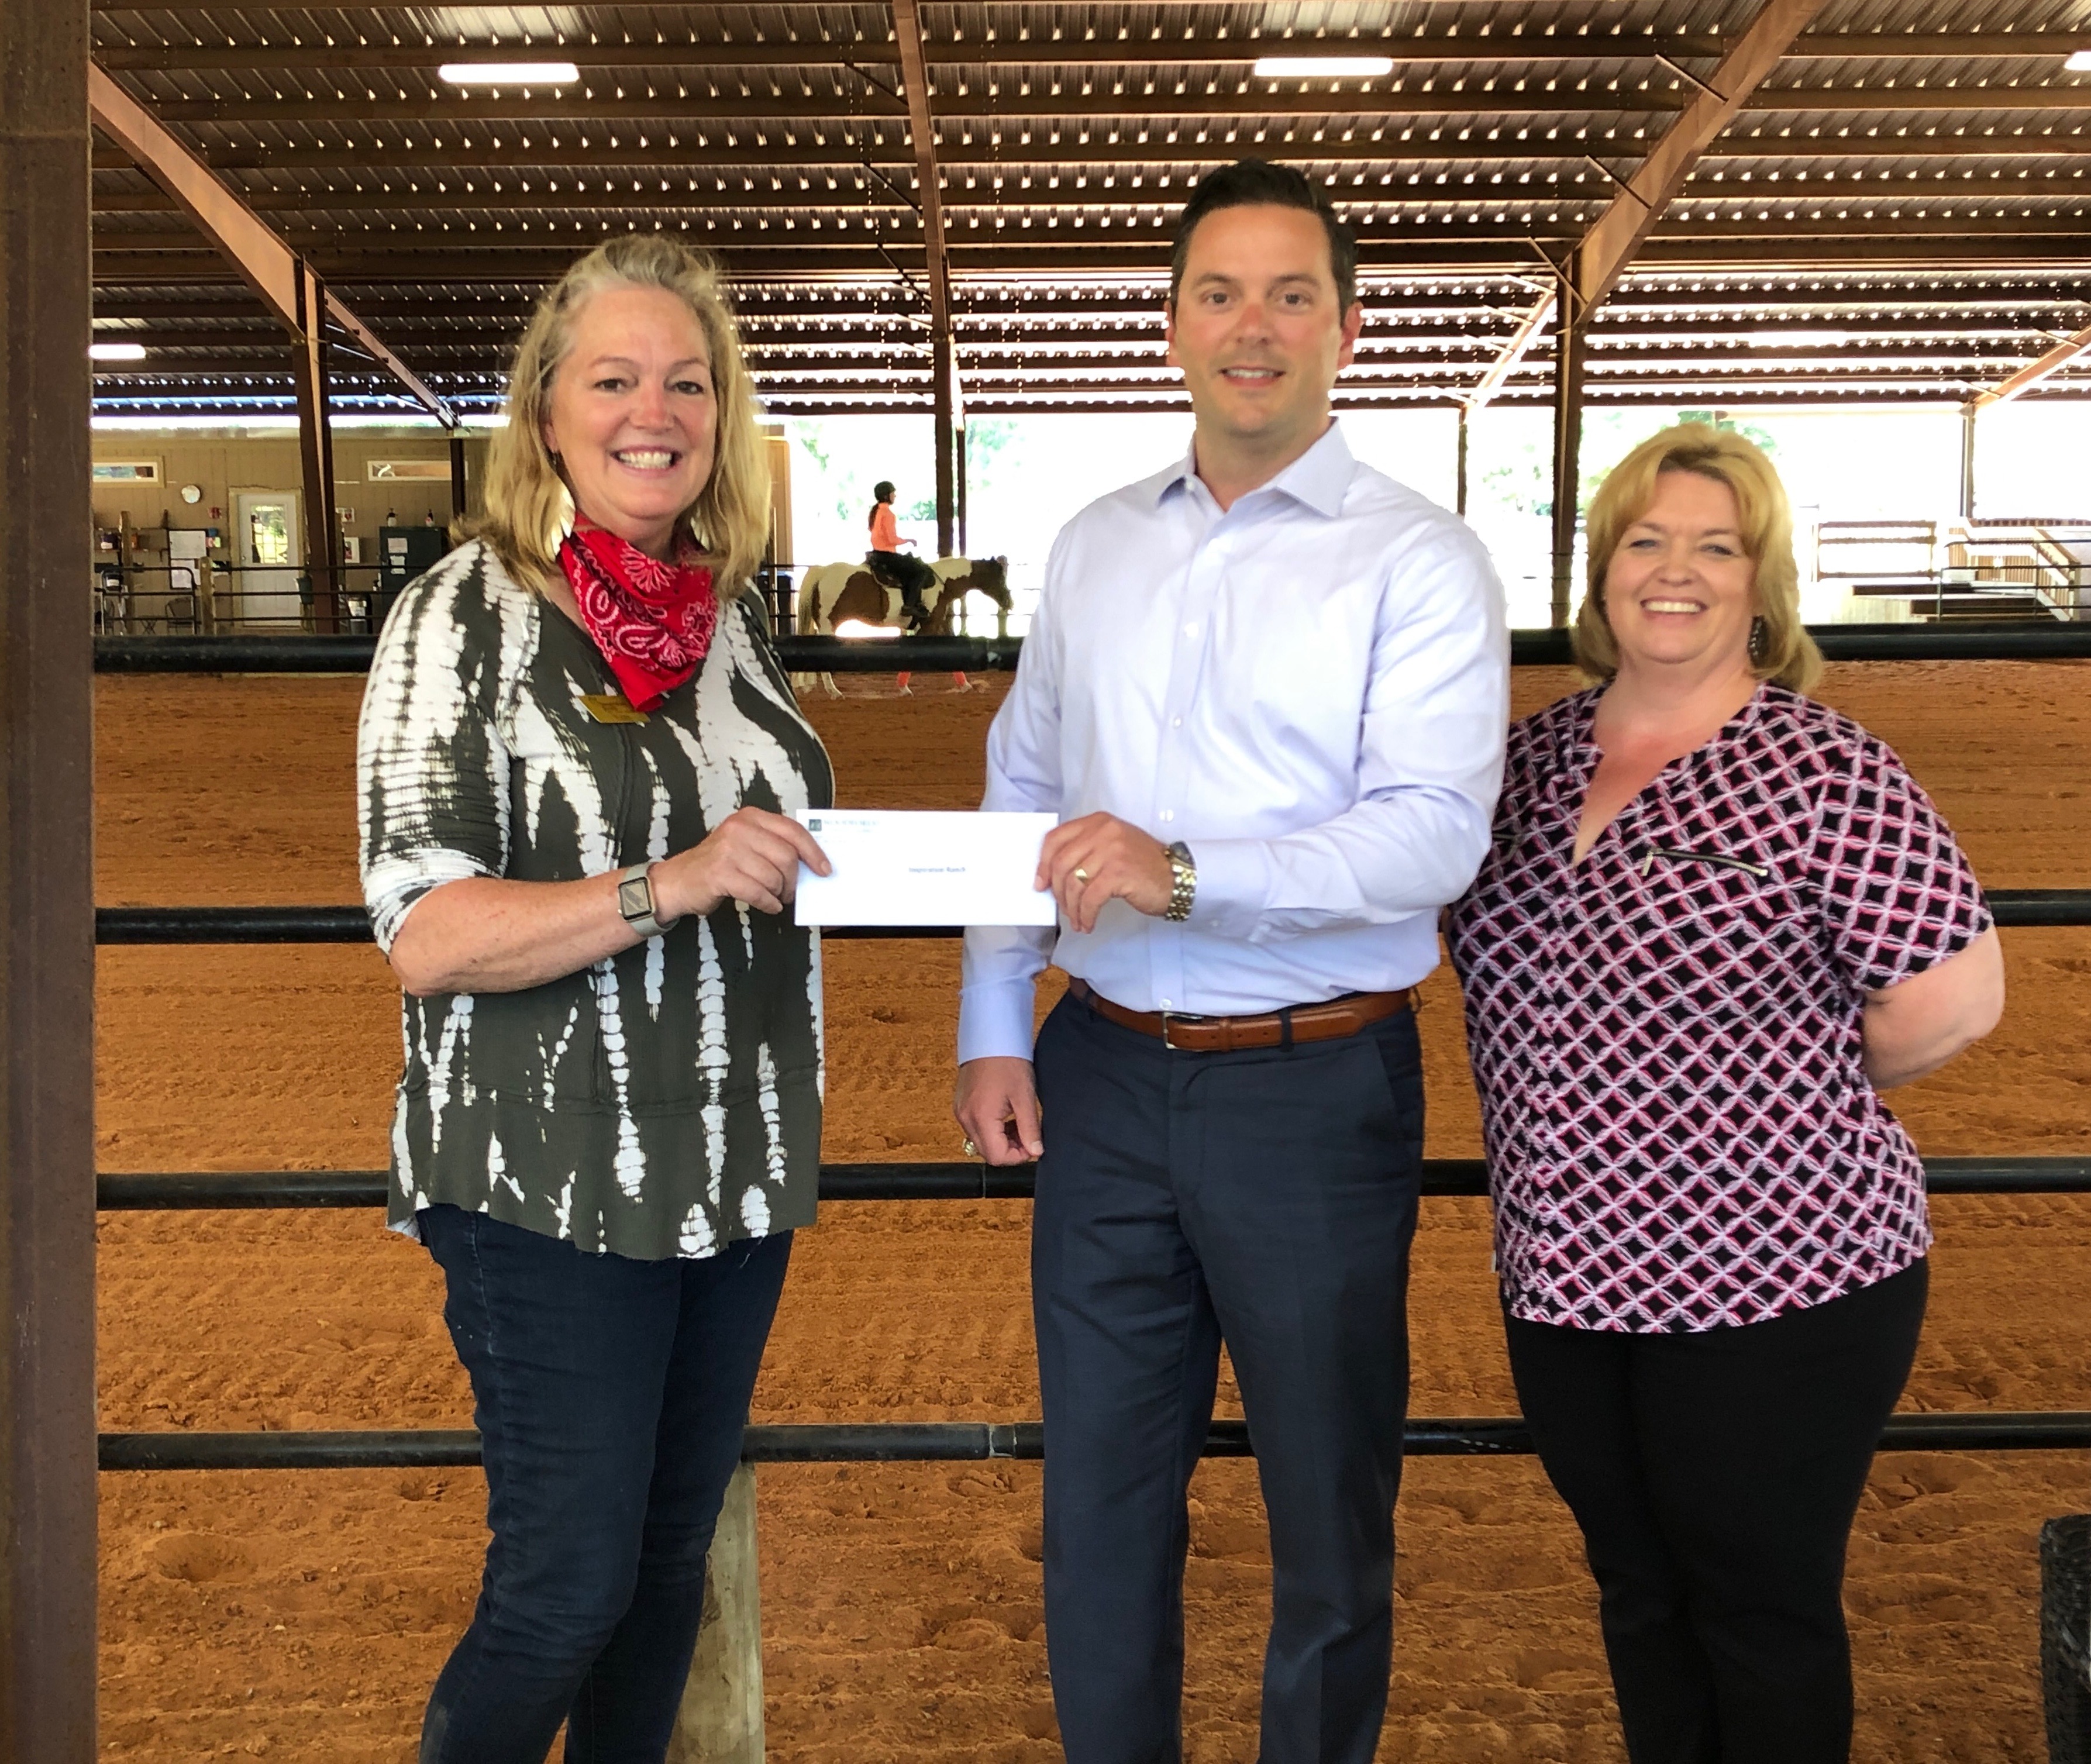 Inspiration Ranch recently received a $7,500 donation from WCF.